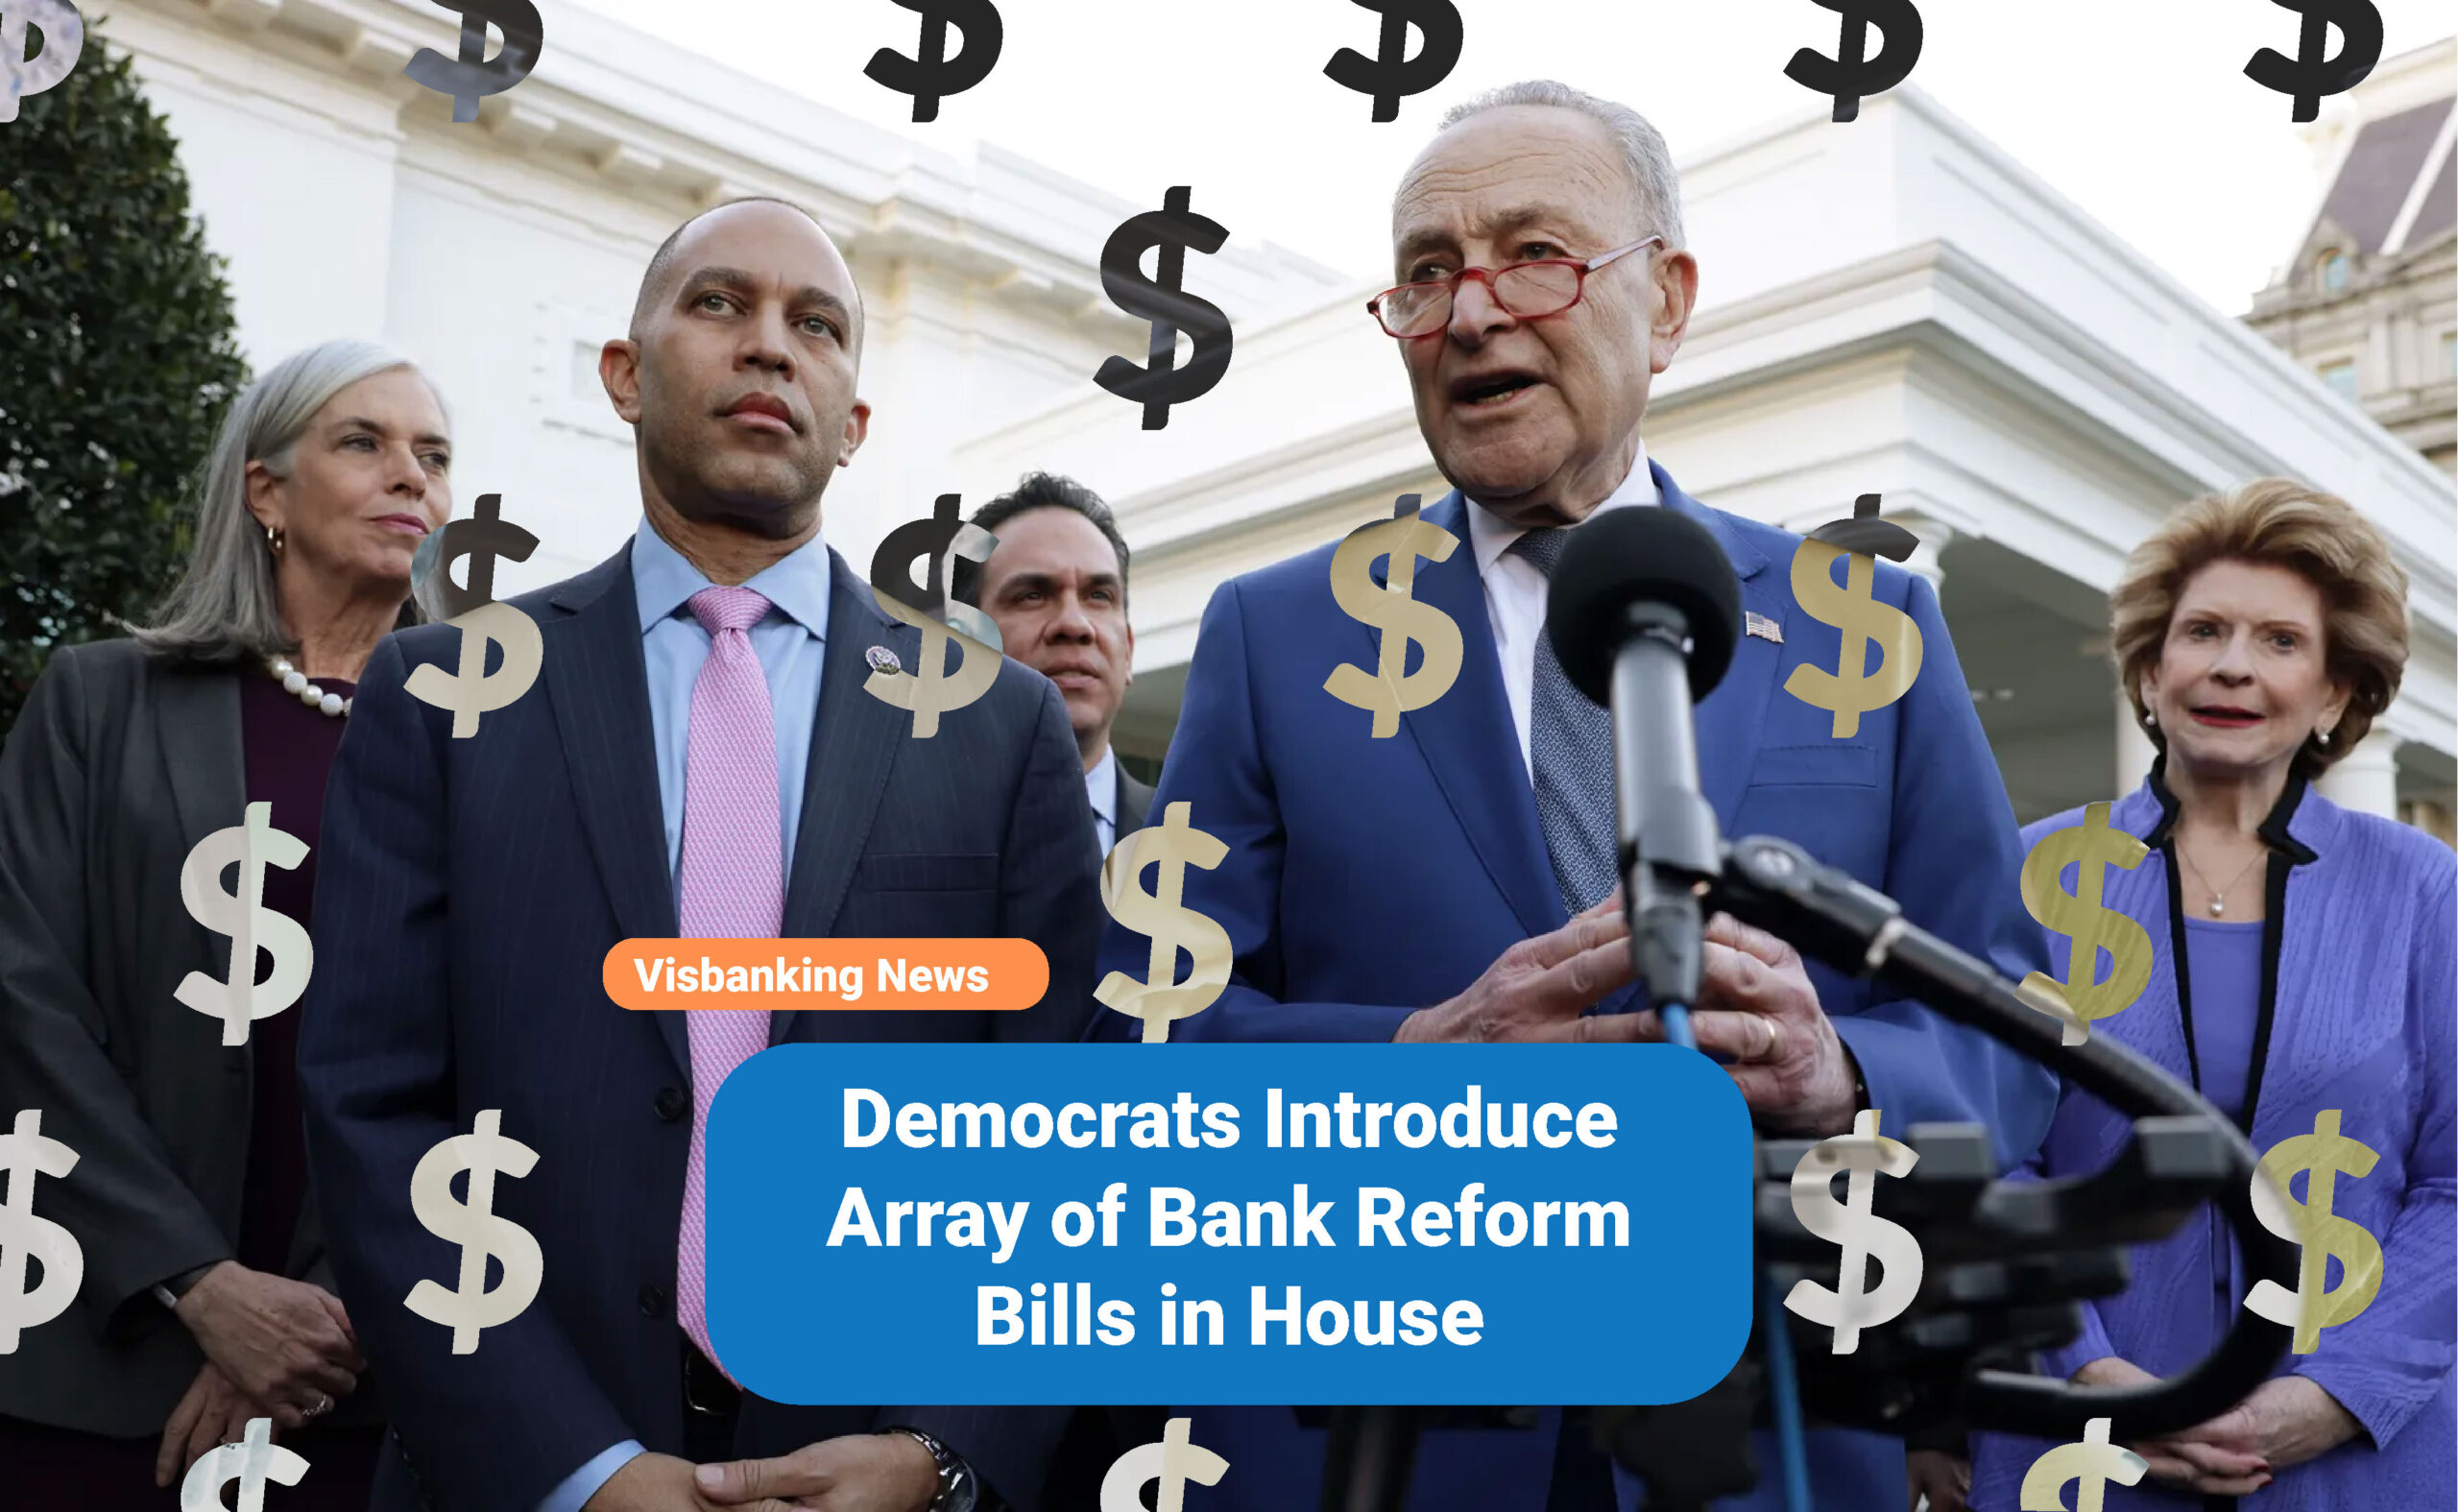 Democrats Introduce Array of Bank Reform Bills in House